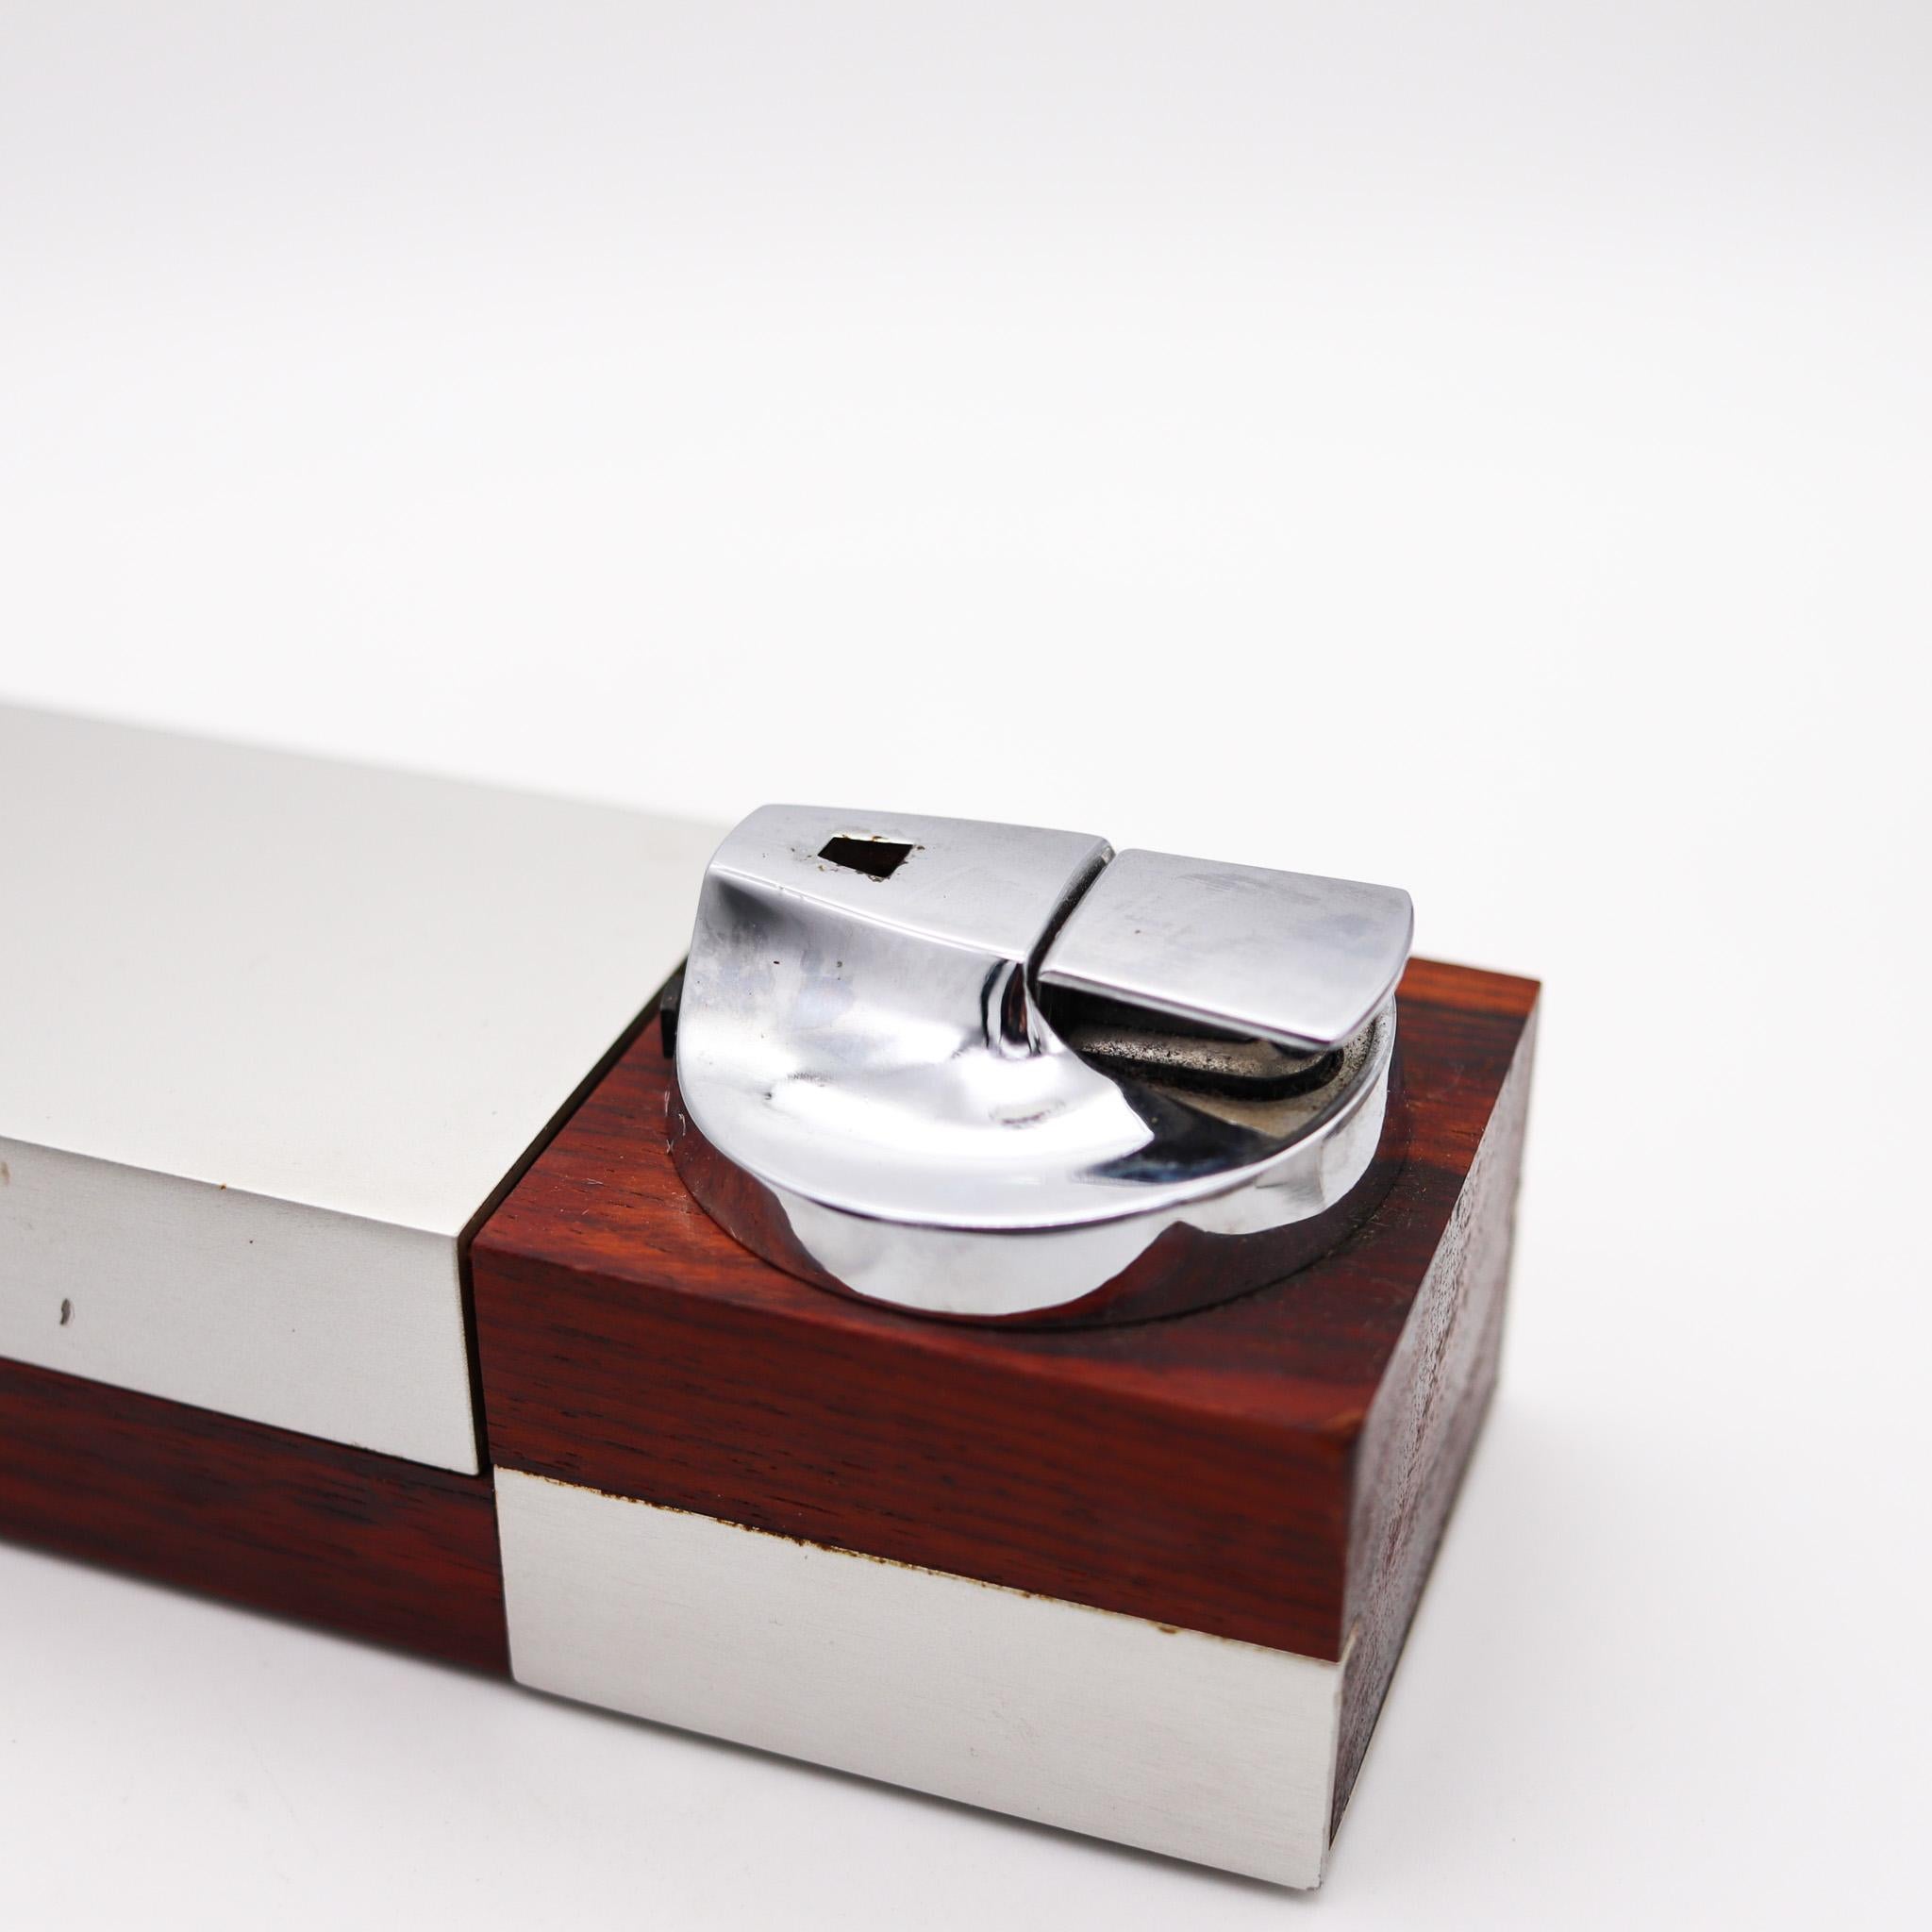 Modernist geometric cigarette box designed by Ronson for Scandia.

An exceptional and very beautiful desk box, created in West Germany by The Ronson Co. for Scandia. This piece was made during the mid-century period, back in the 1960 and designed